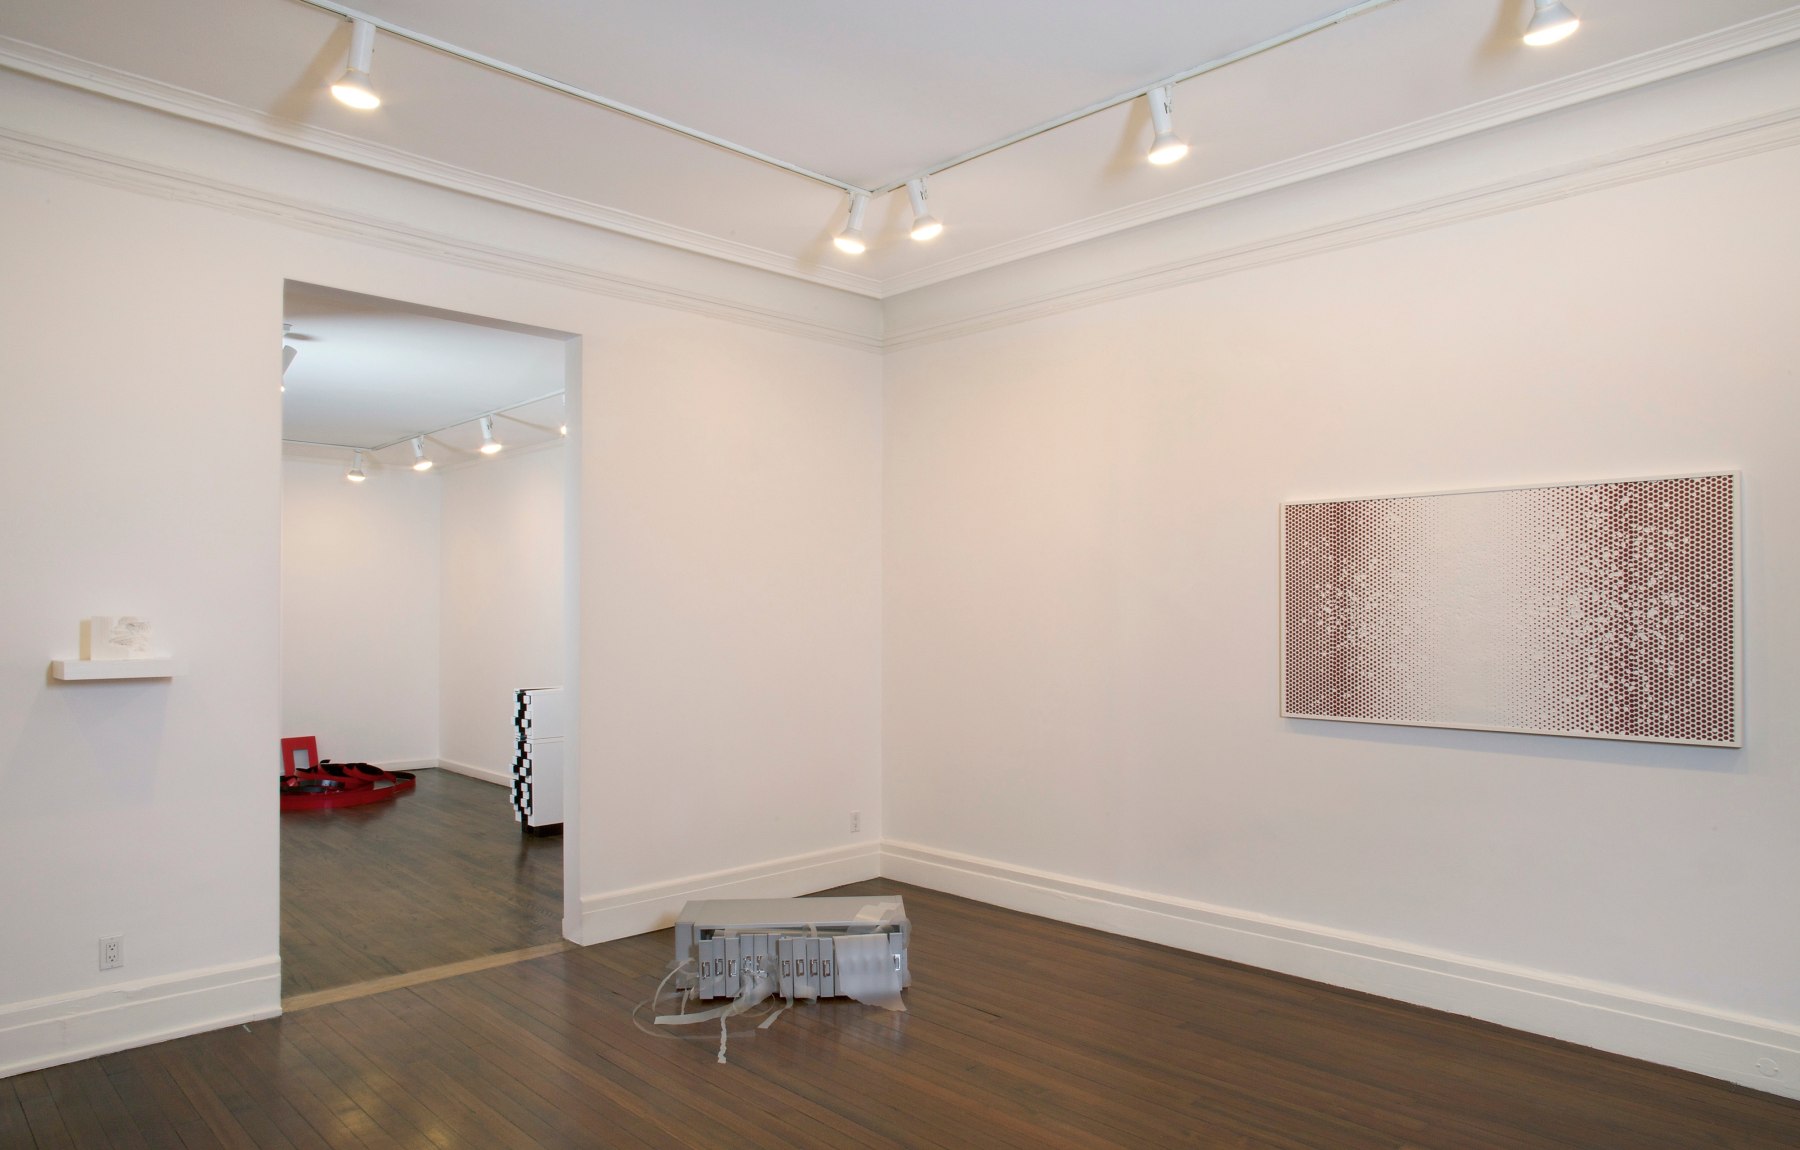 Installation view, Noriko Ambe: Cutting &ndash; Without an Outline, 18 EAST 77